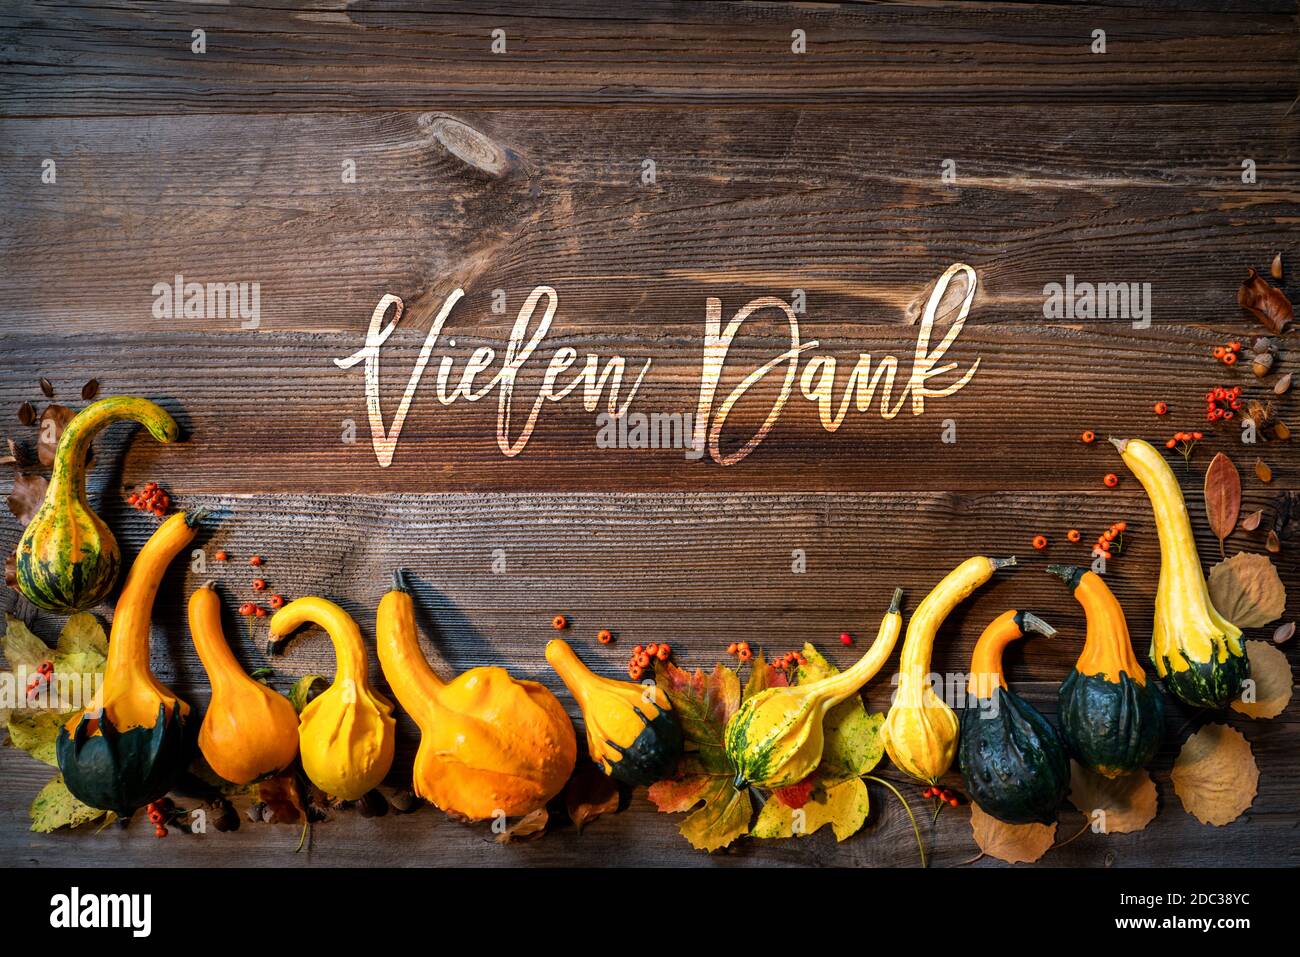 Colorful Yellow And Orange Pumpkins As Autumn Season Decoration With German Text Vielen Dank Means Thank You. Brown Wooden Rustic Vintage Background Stock Photo